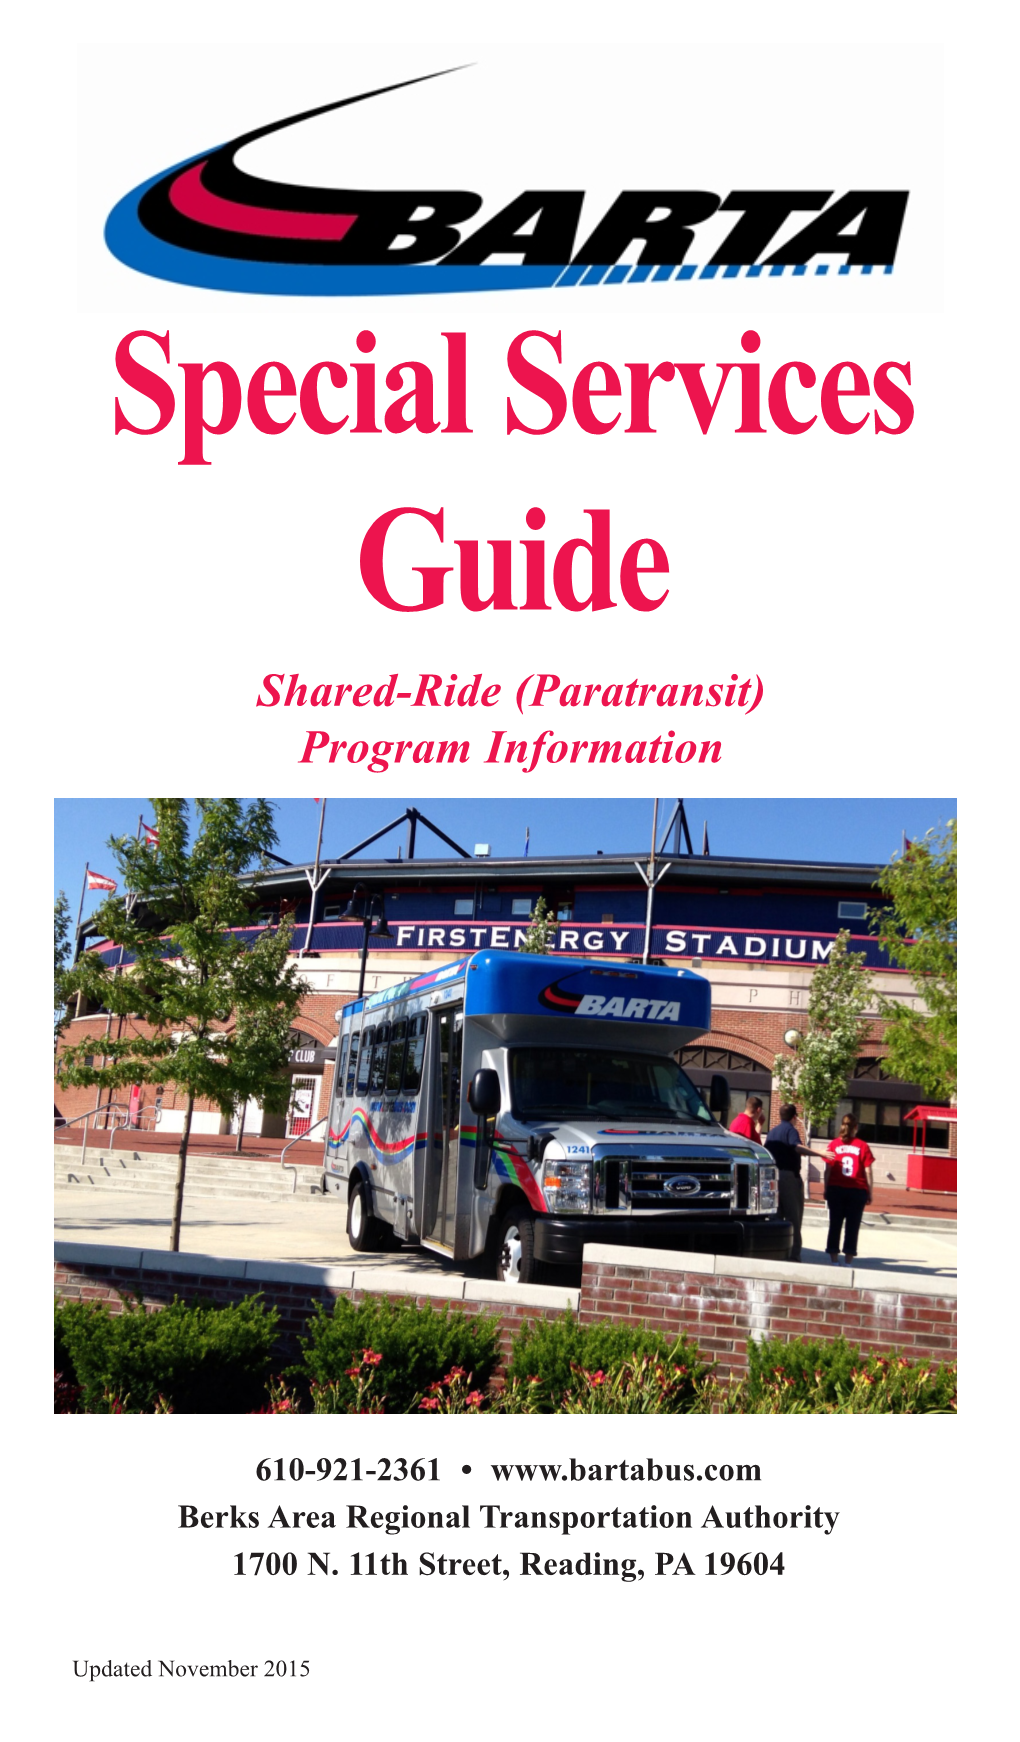 Special Services Guide Shared-Ride (Paratransit) Program Information